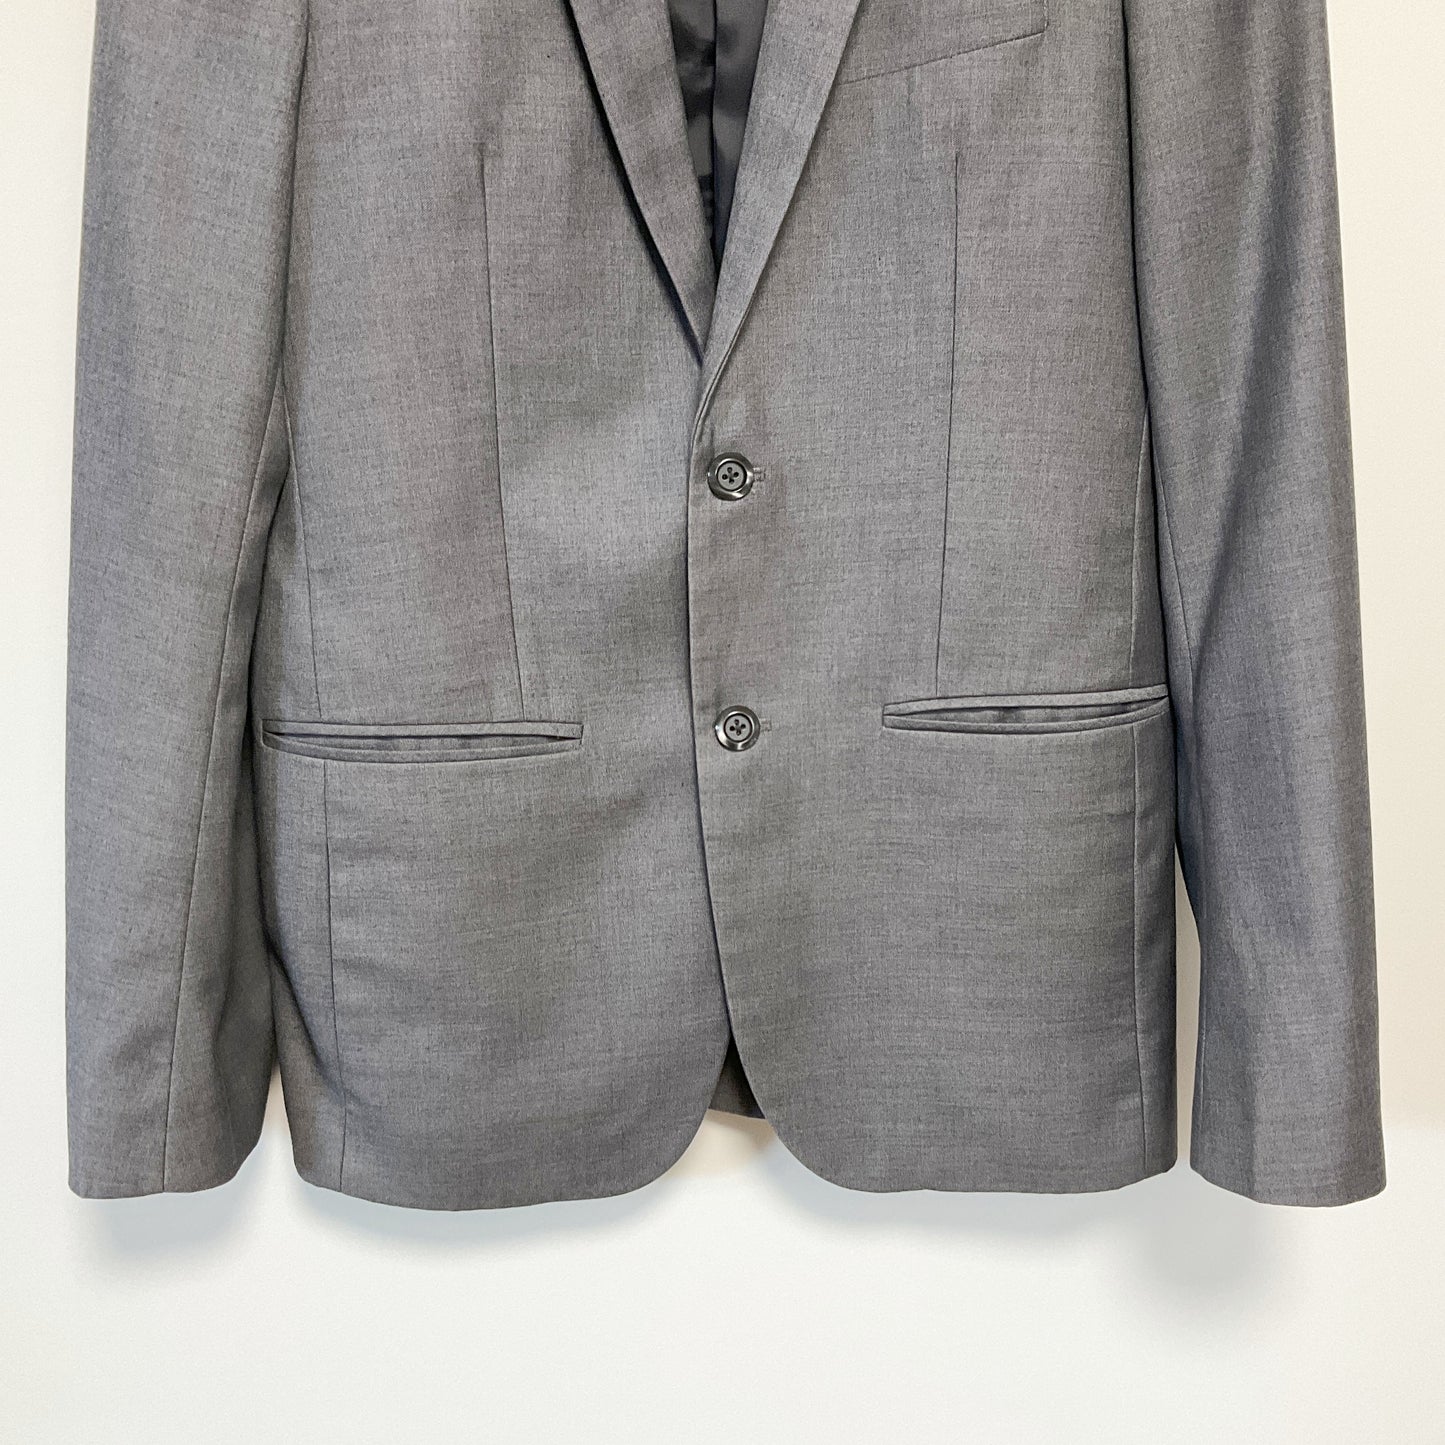 TailorMadeSuits - jacket